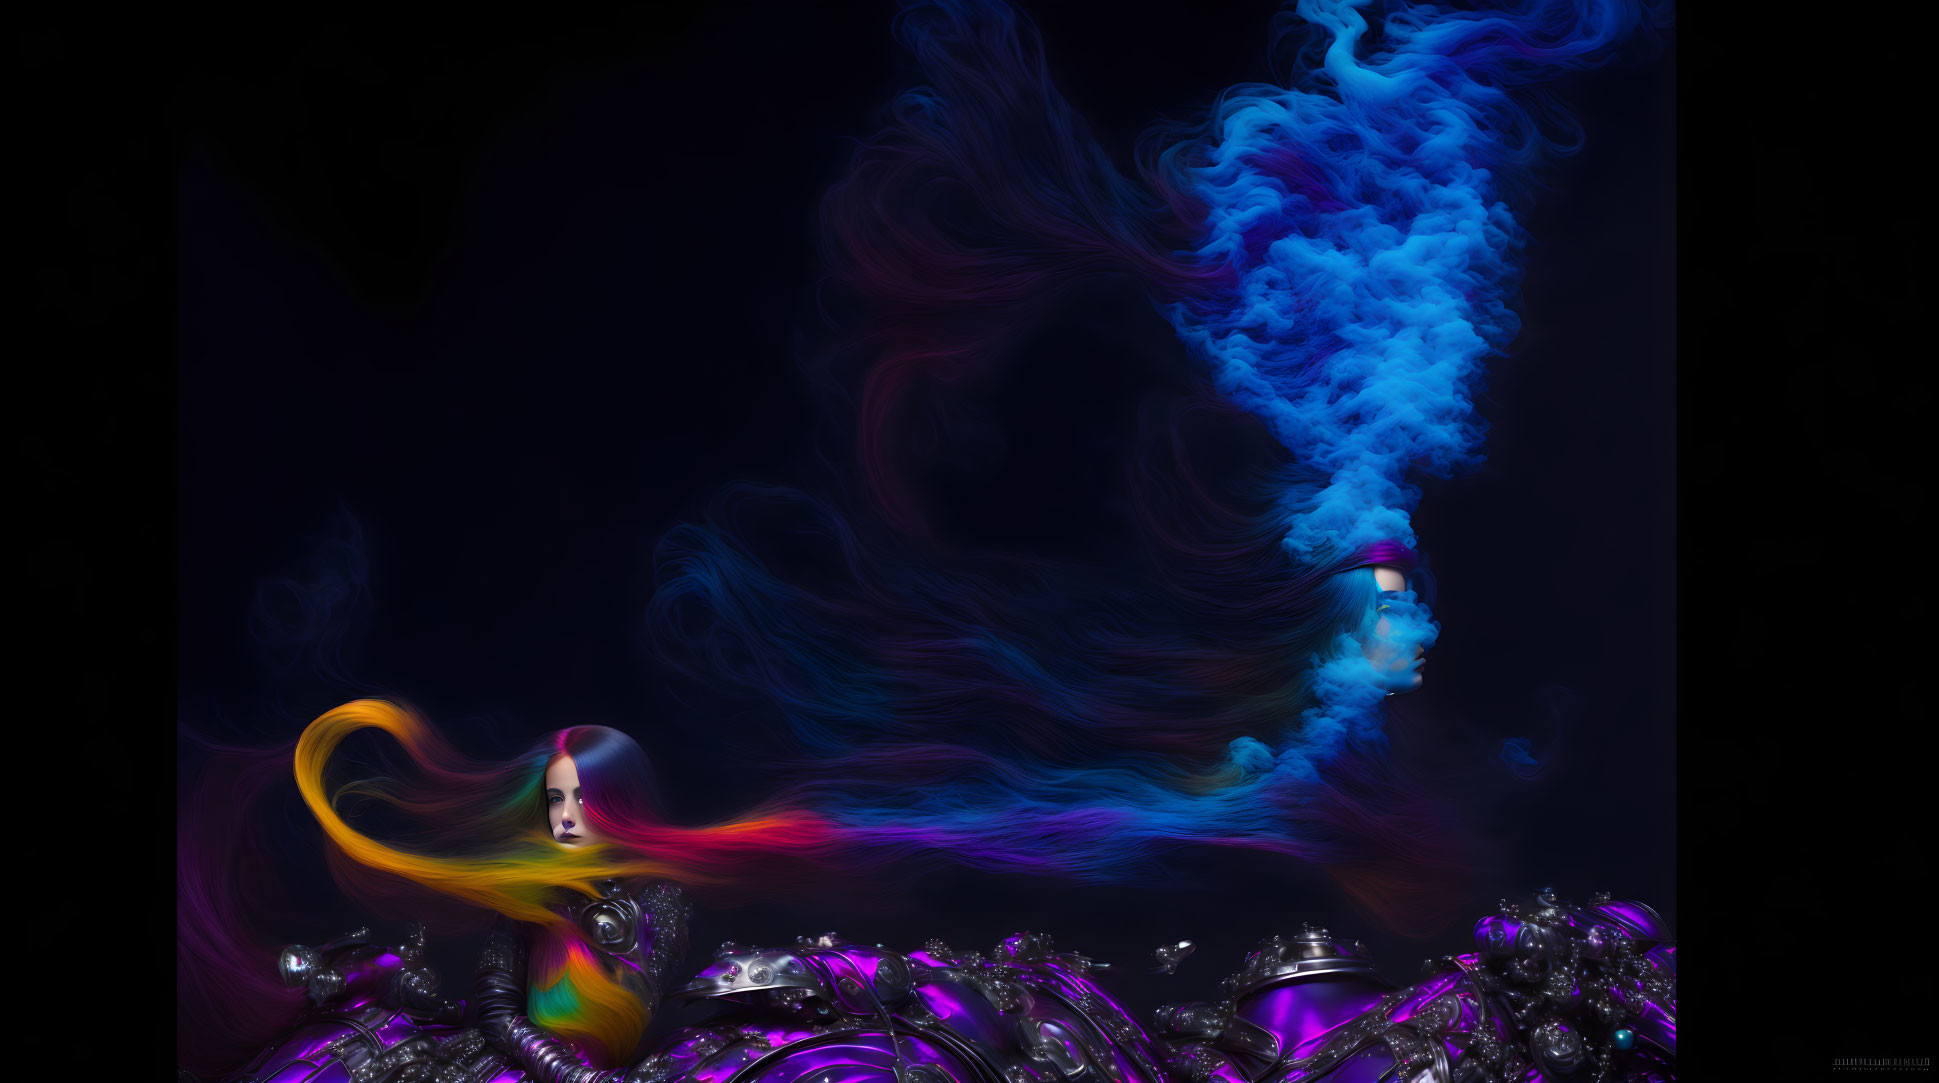 Colorful smoky design around stylized figure and metallic structures